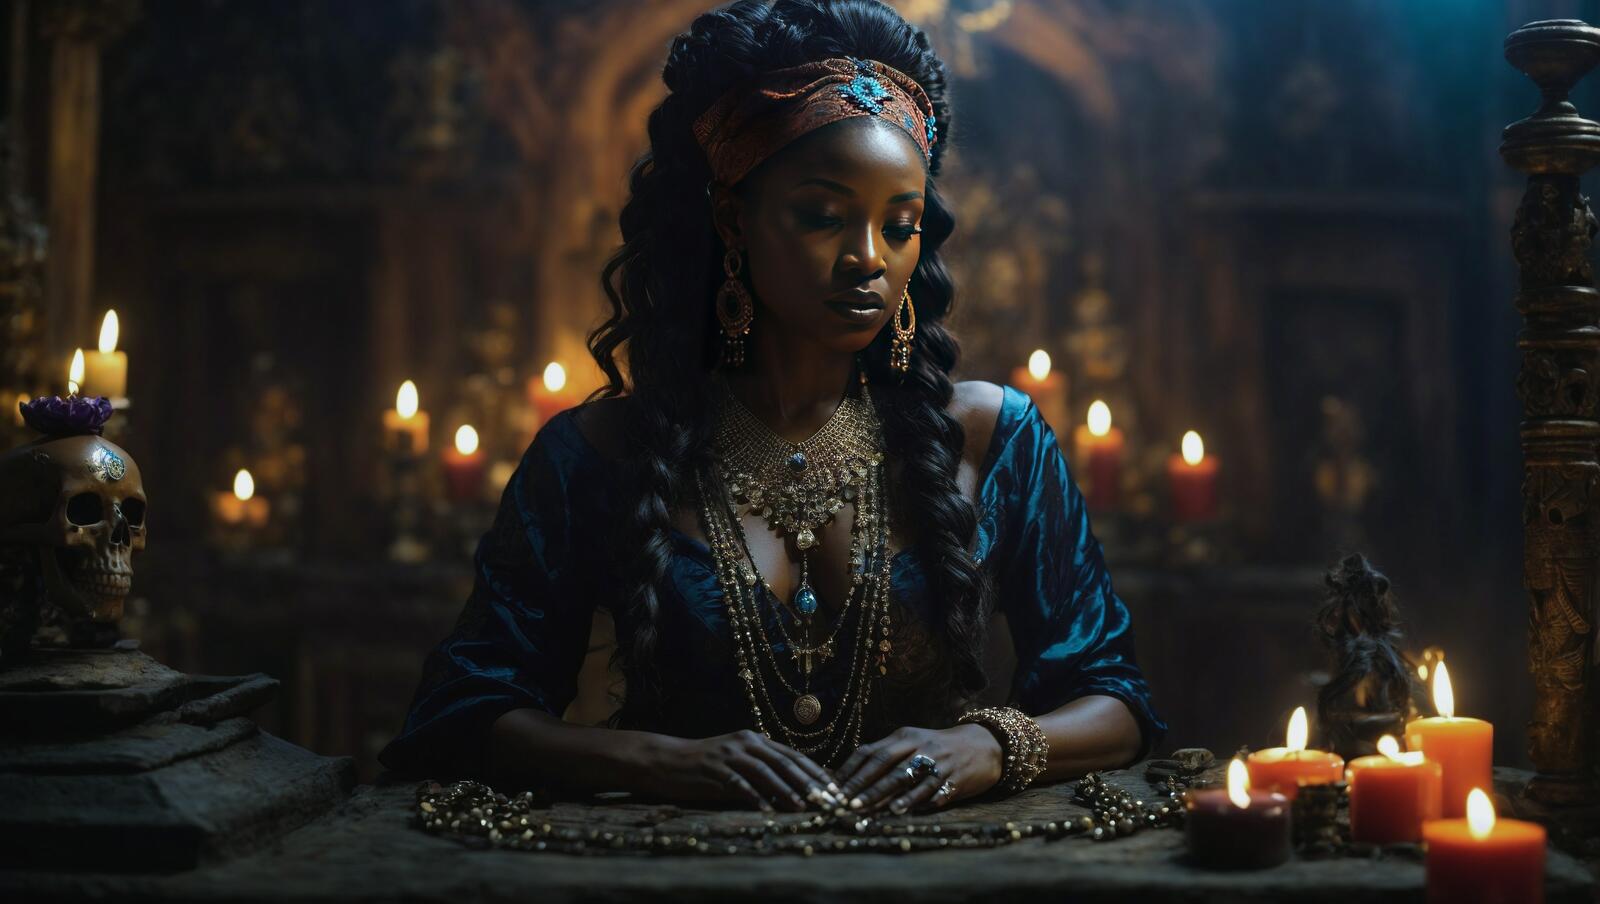 Free photo A woman in renaissance dress and tiara sits at a table with candles